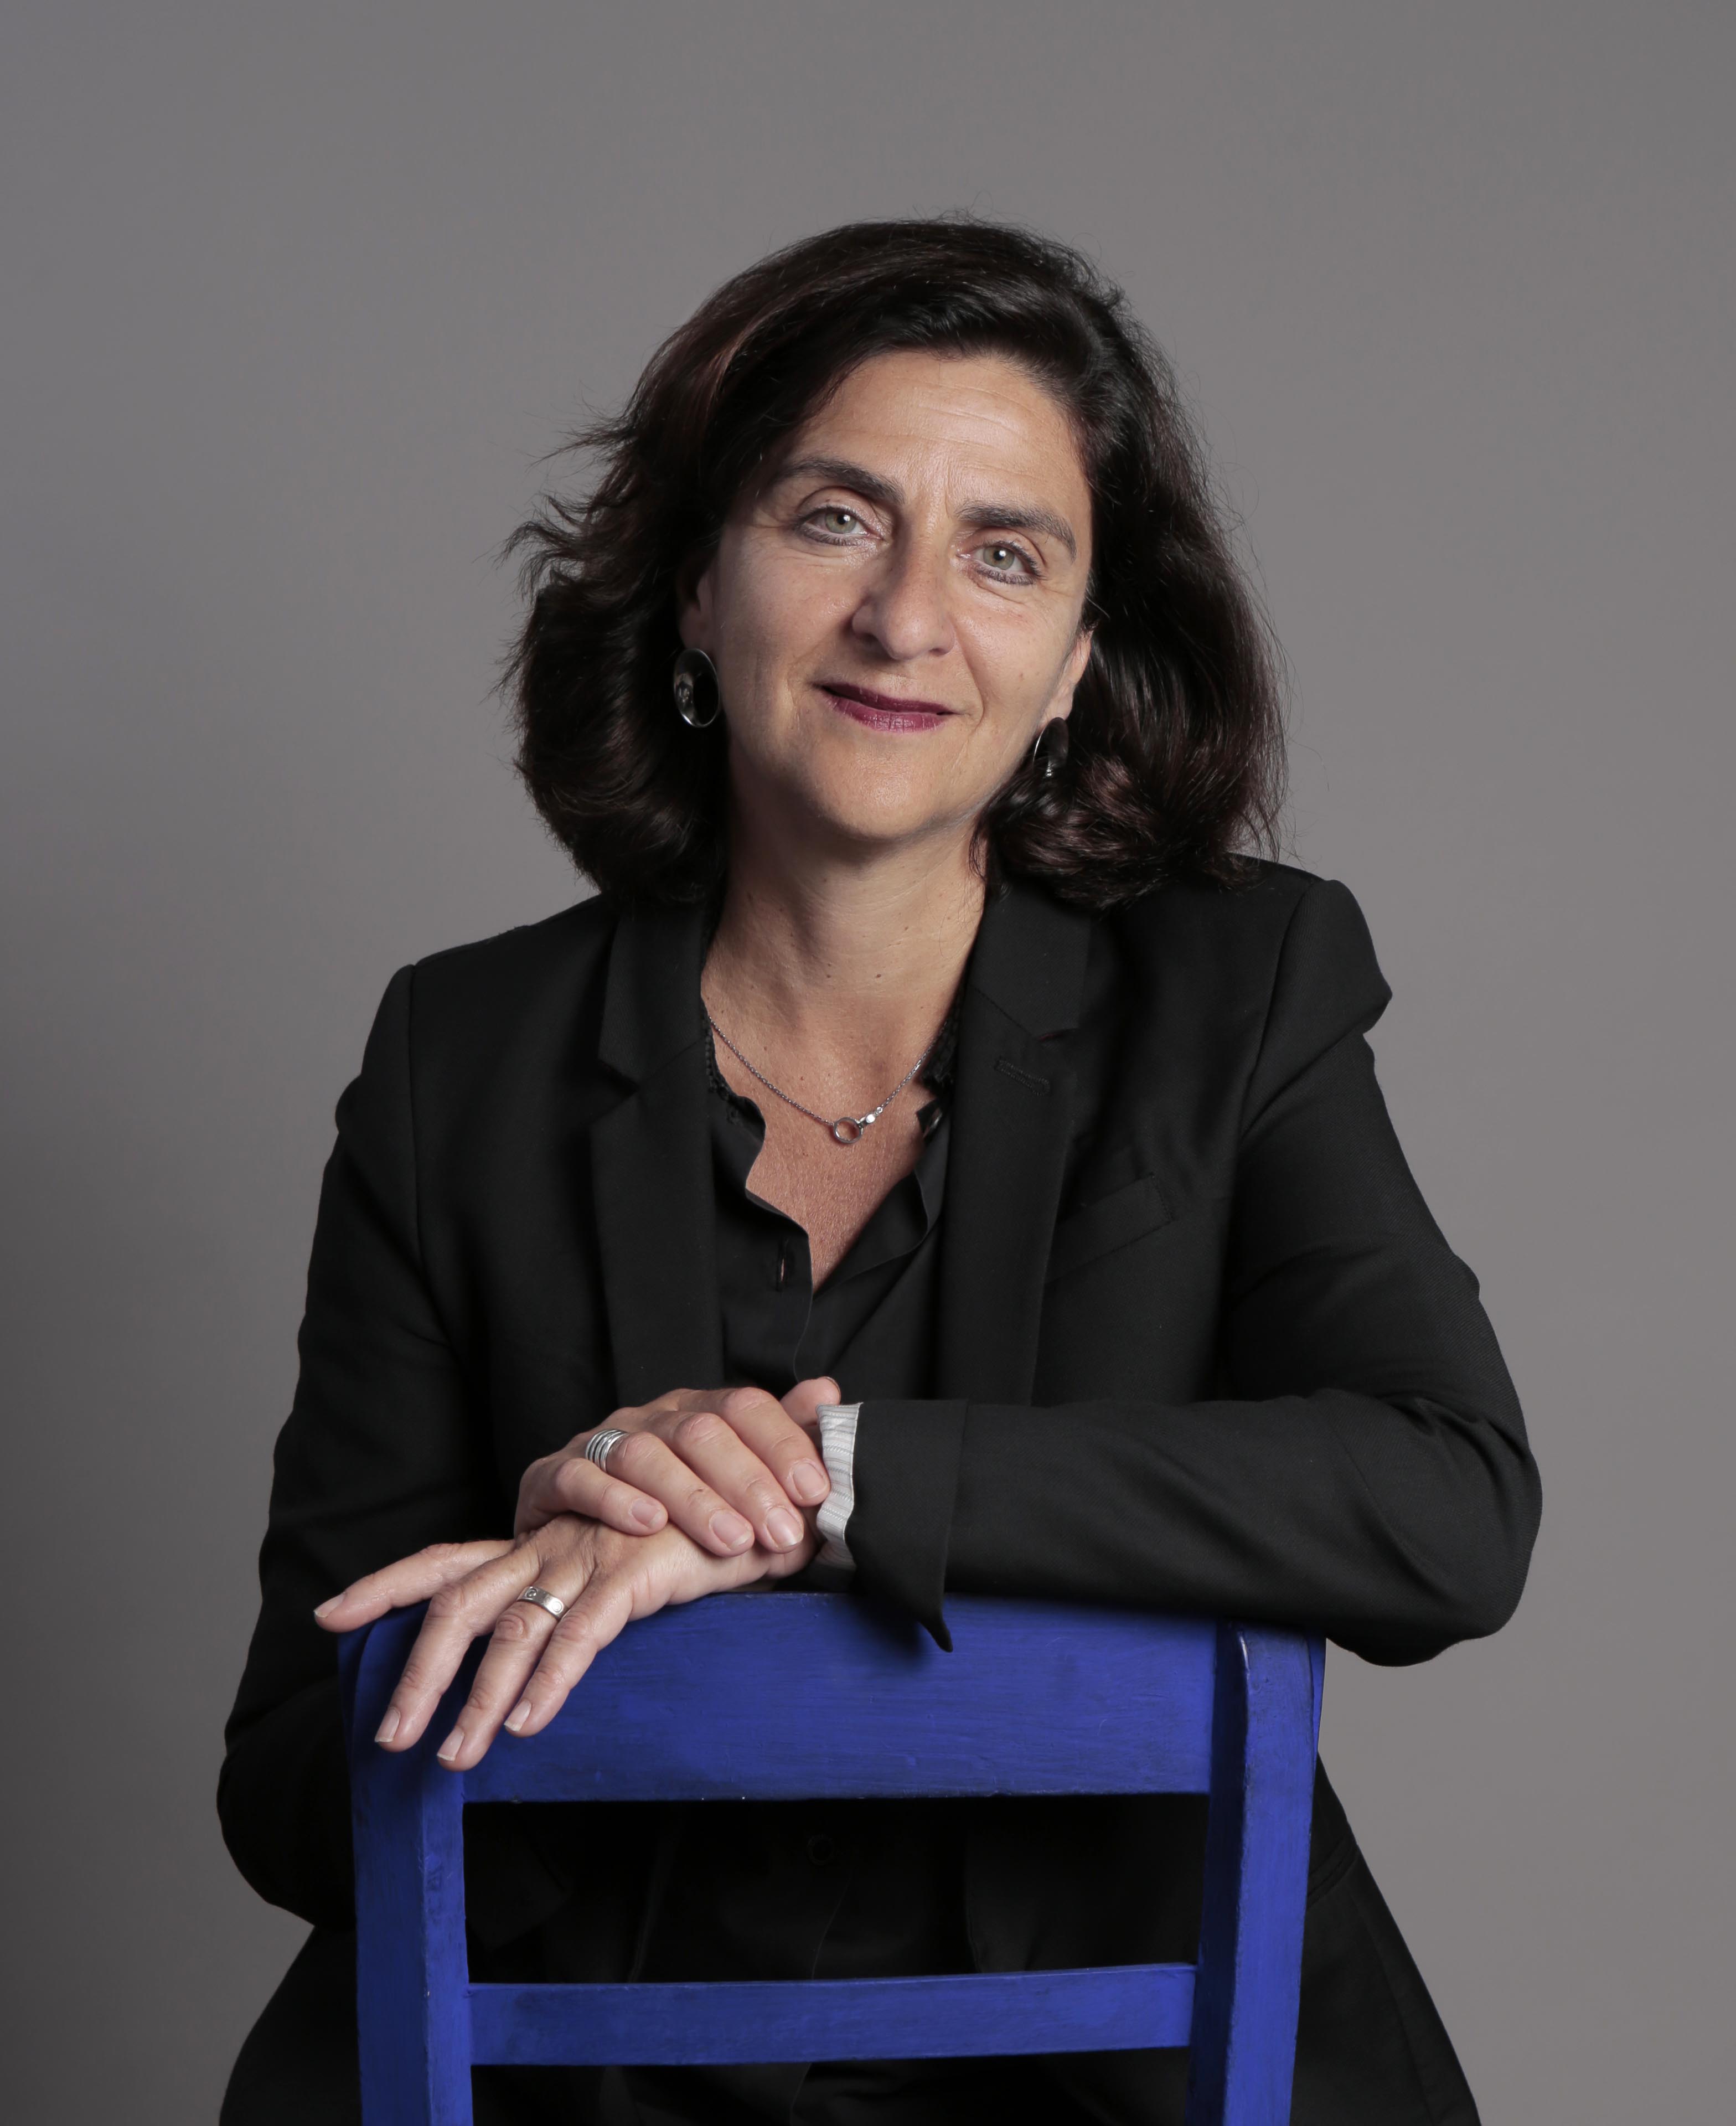 Nayla Mecattaf – the French-Swiss architect is the opening speaker at the E2 Forum Frankfurt conference on 21 September with her keynote address on highrise buildings of the future.